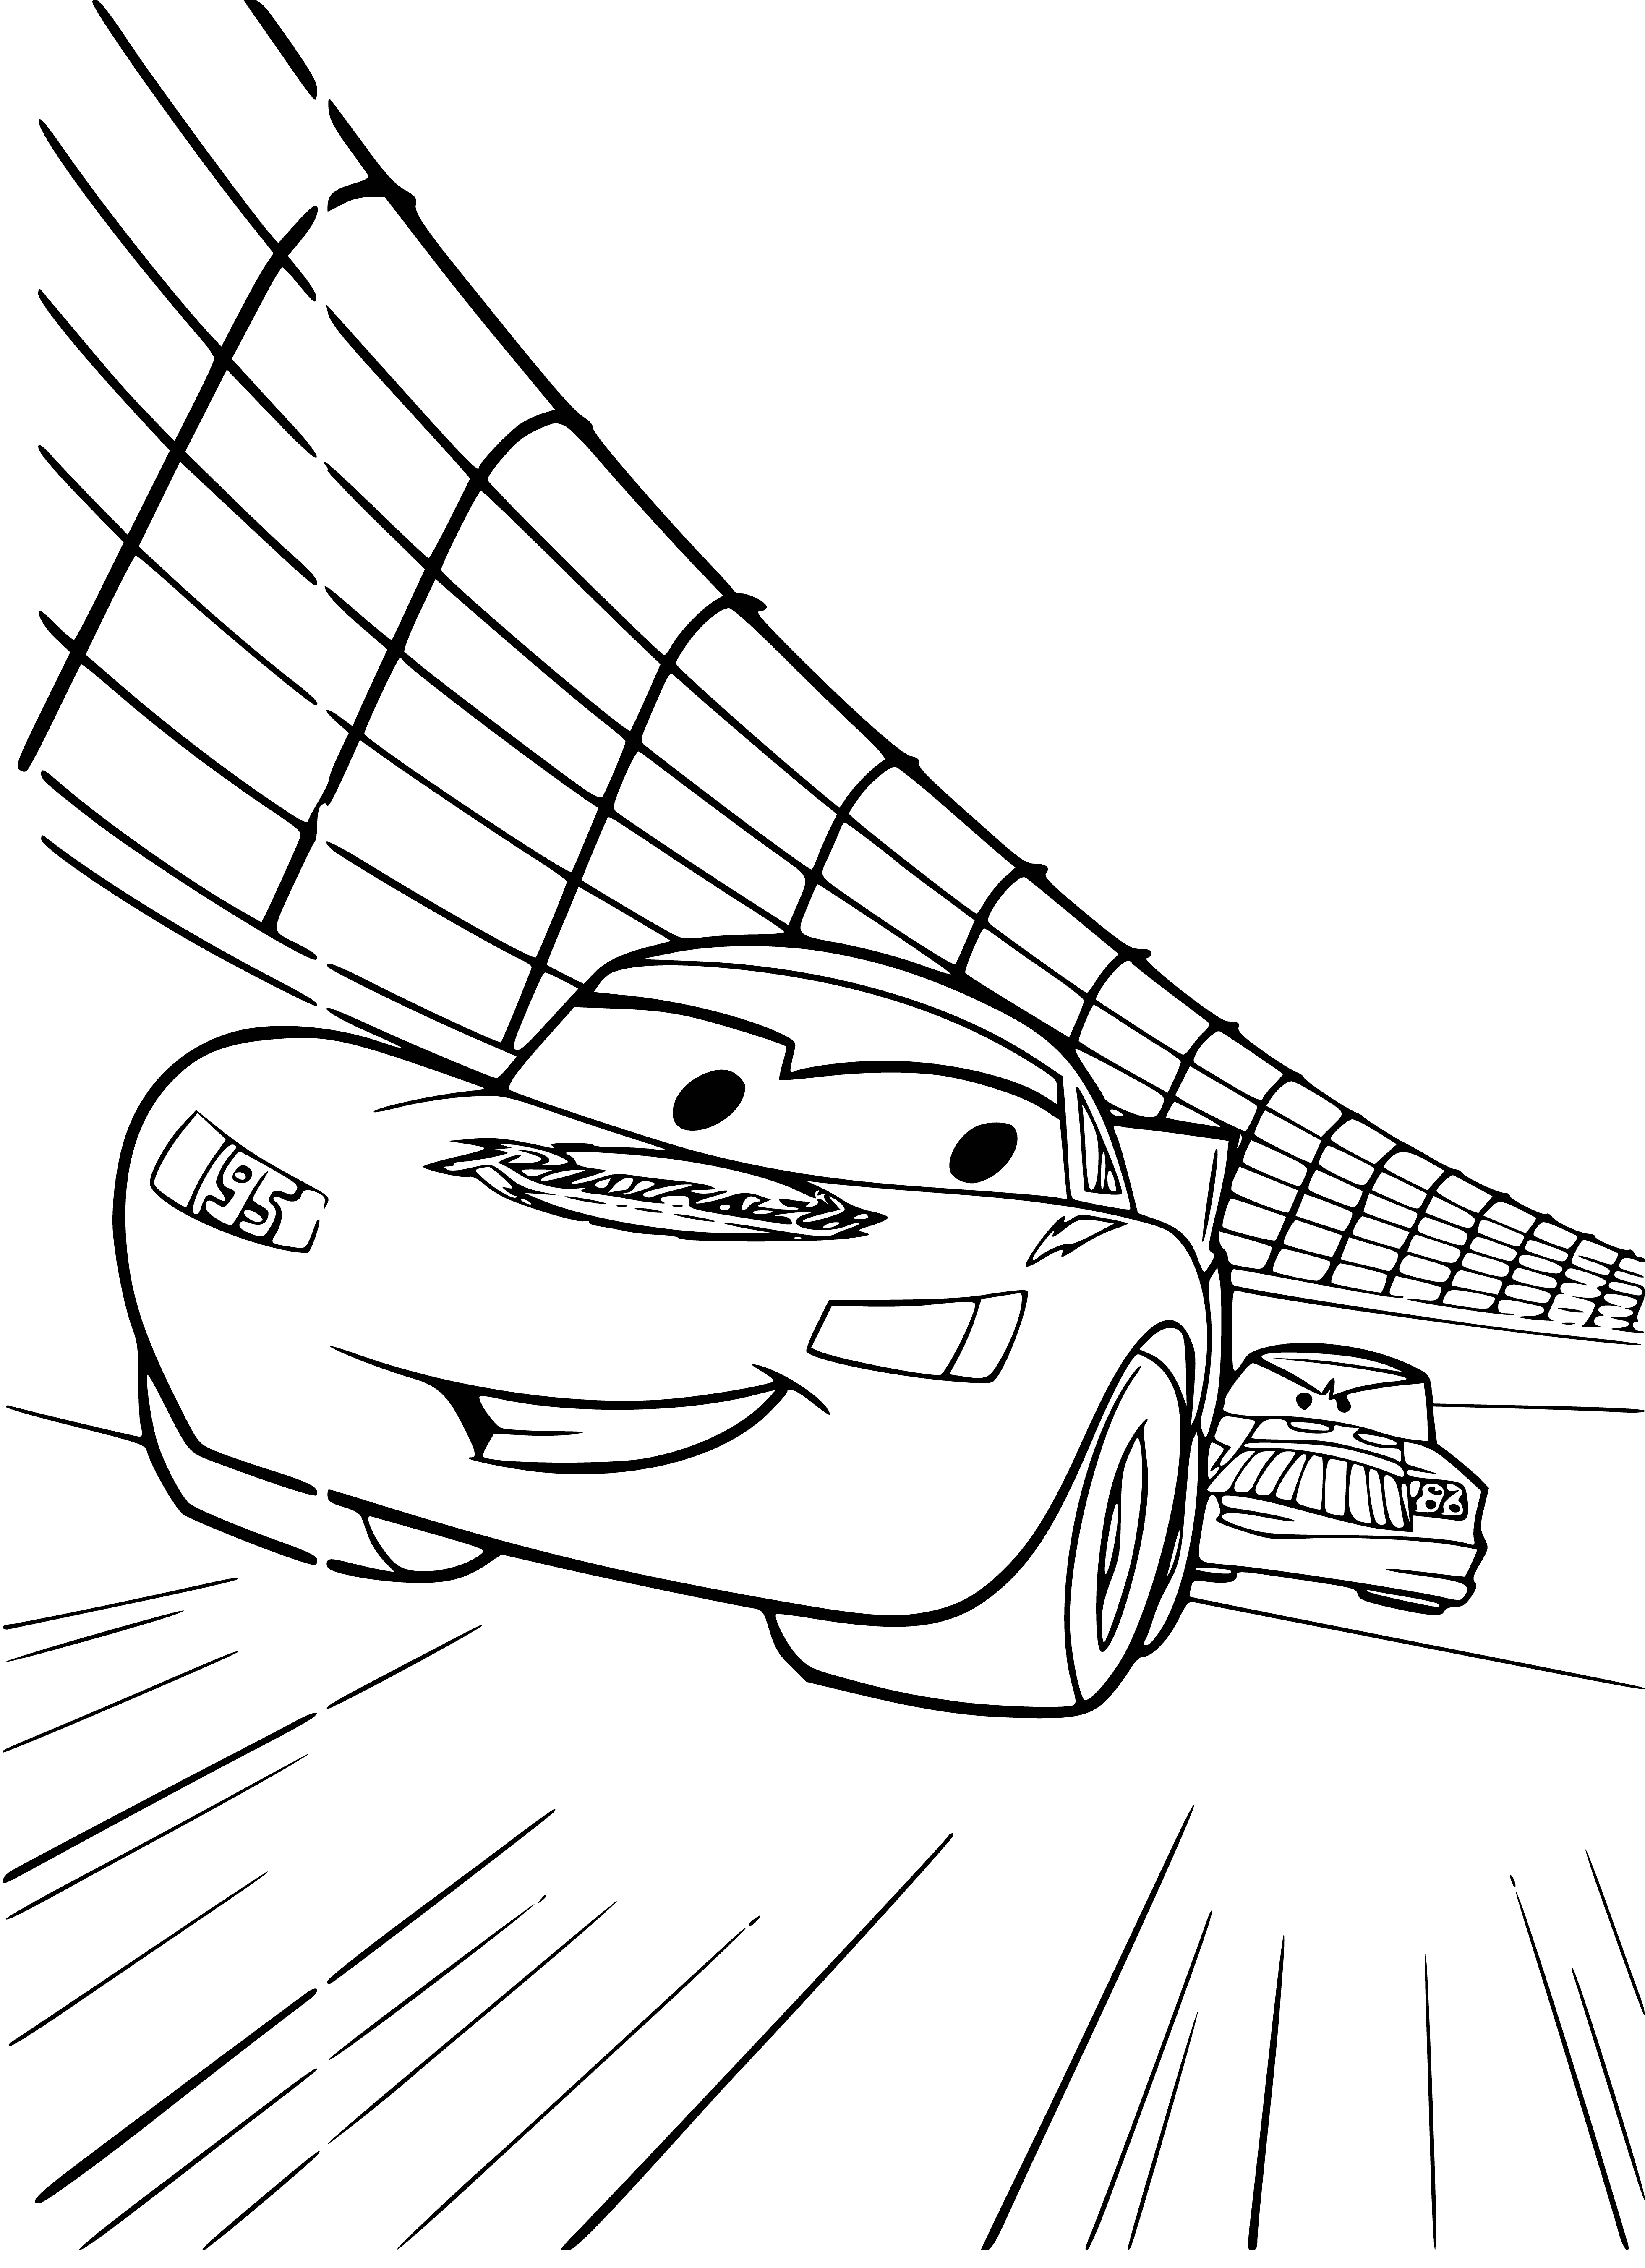 coloring page: Lightning McQueen races to the lead and looks to win, while other cars lag behind. #Cars3